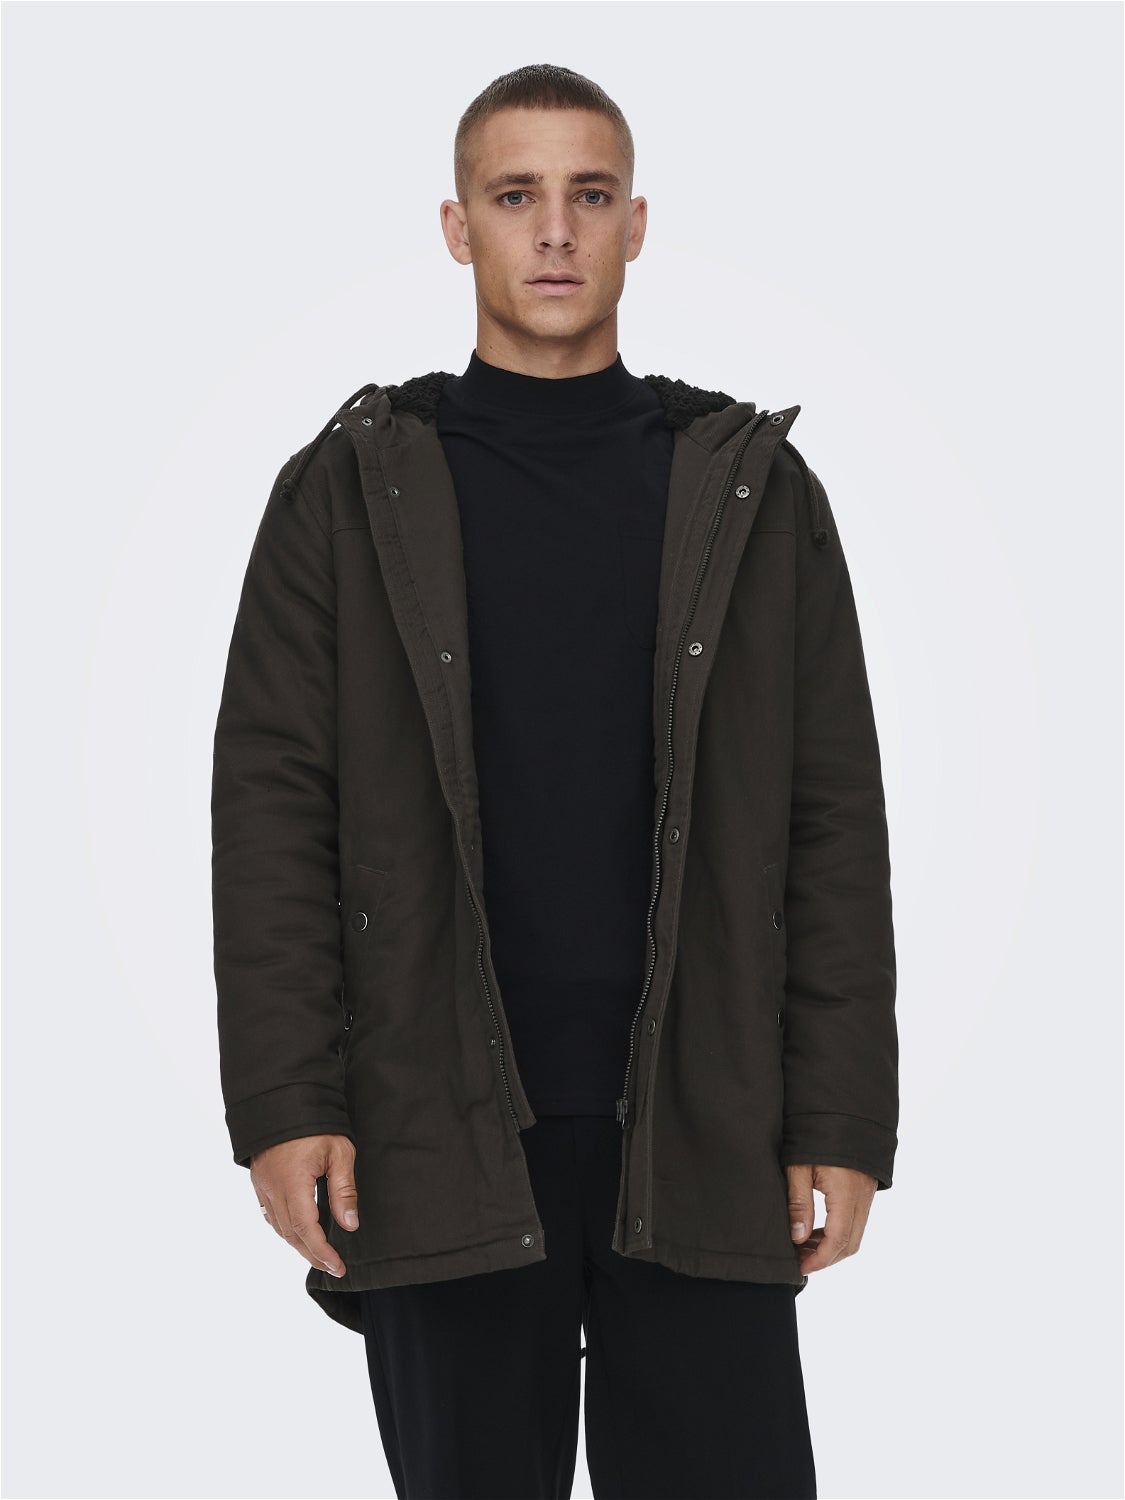 Hood with string regulation Buttoned cuffs Jacket